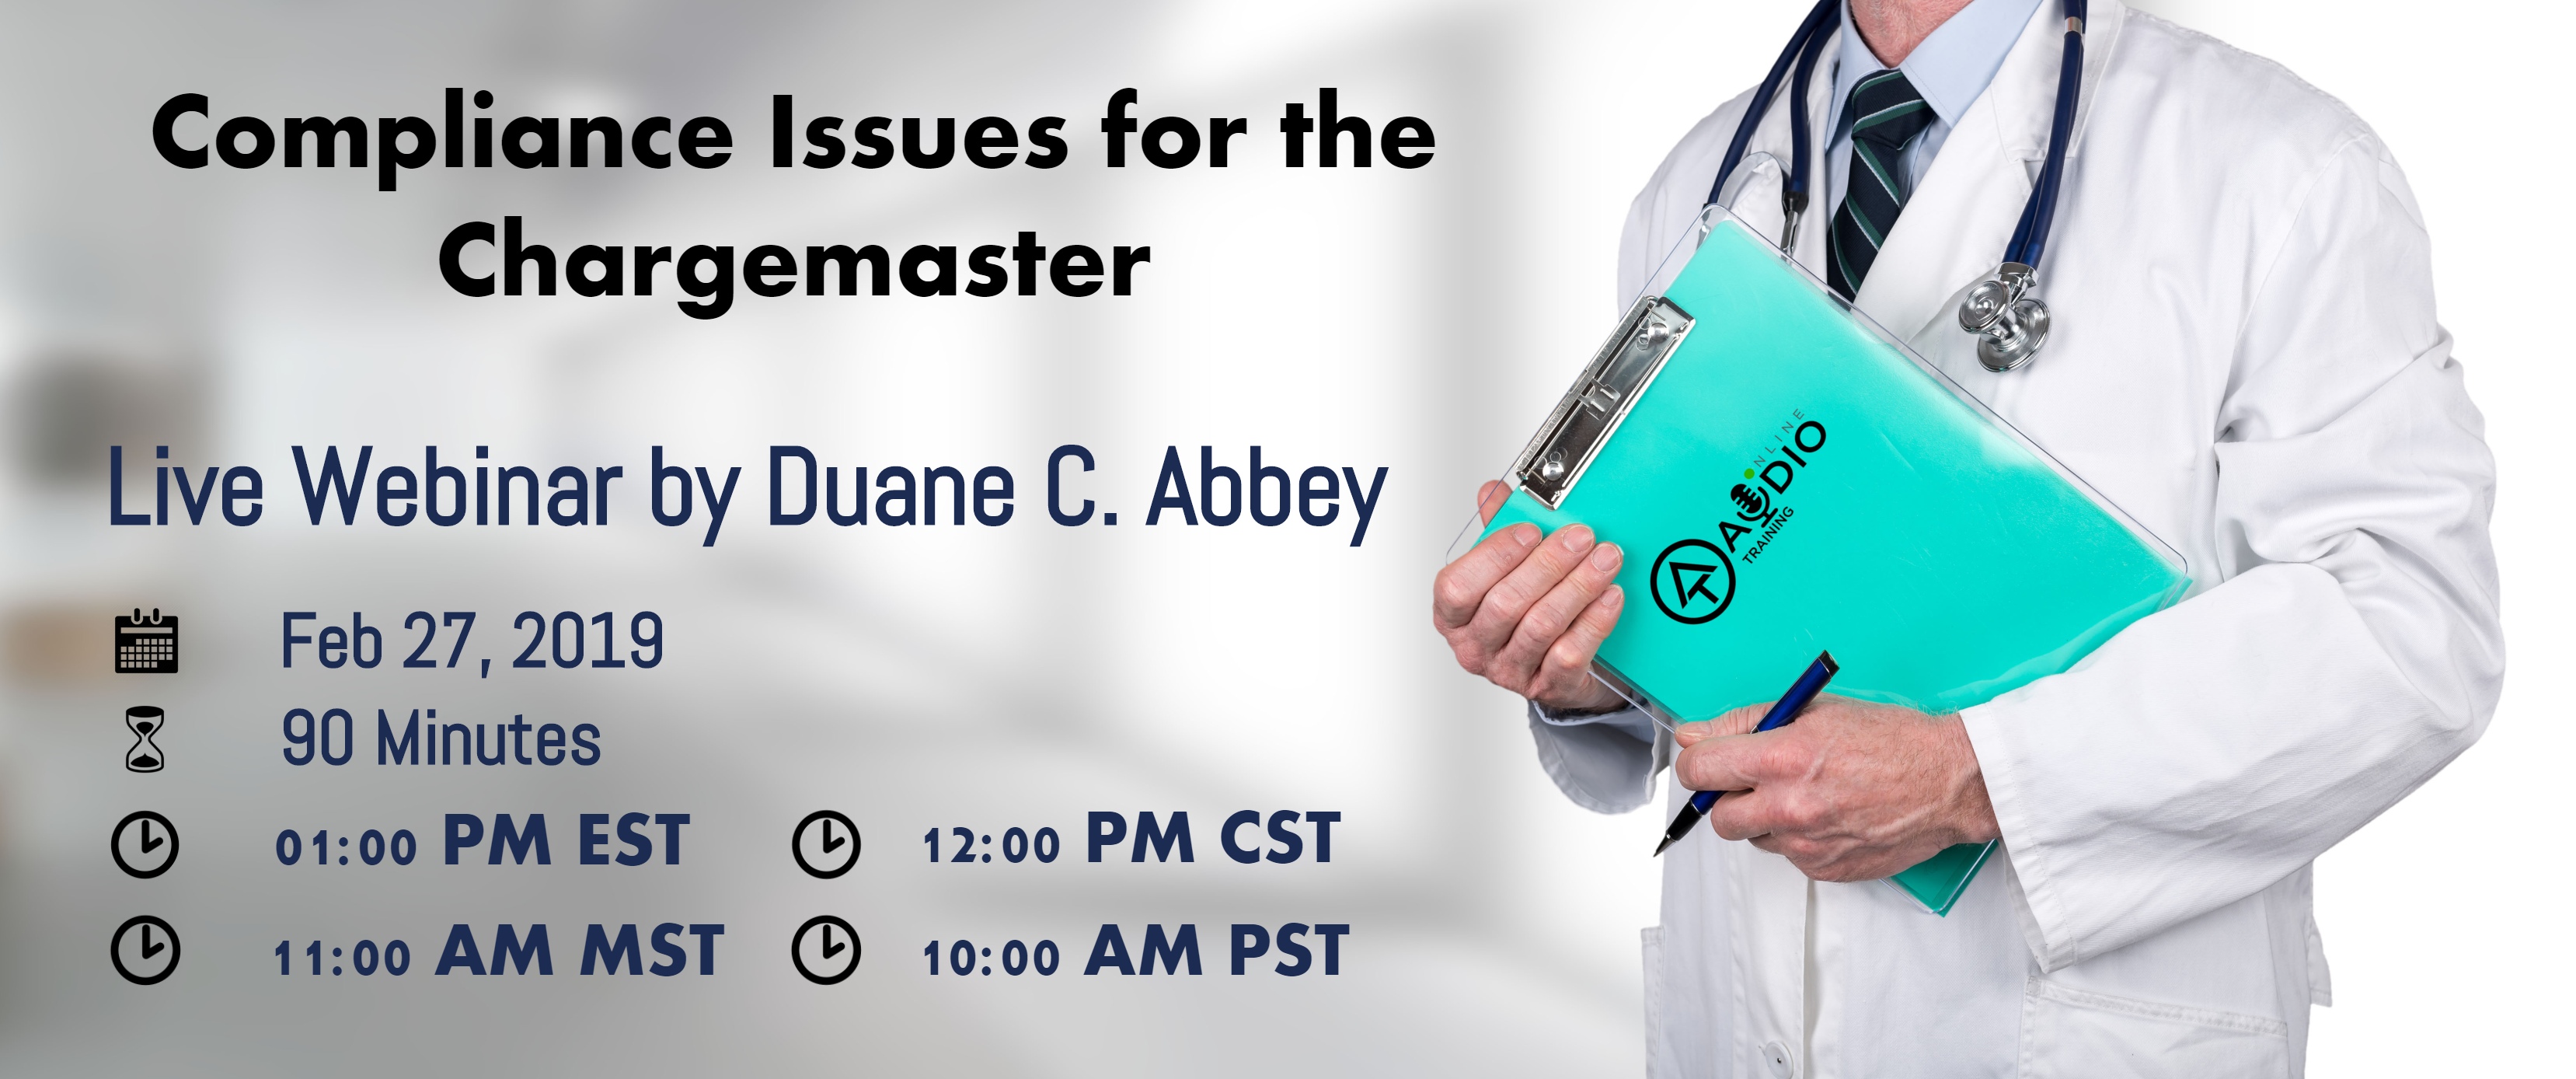 Compliance Issues for the Chargemaster by Duane C Abbey, Los Angeles, California, United States